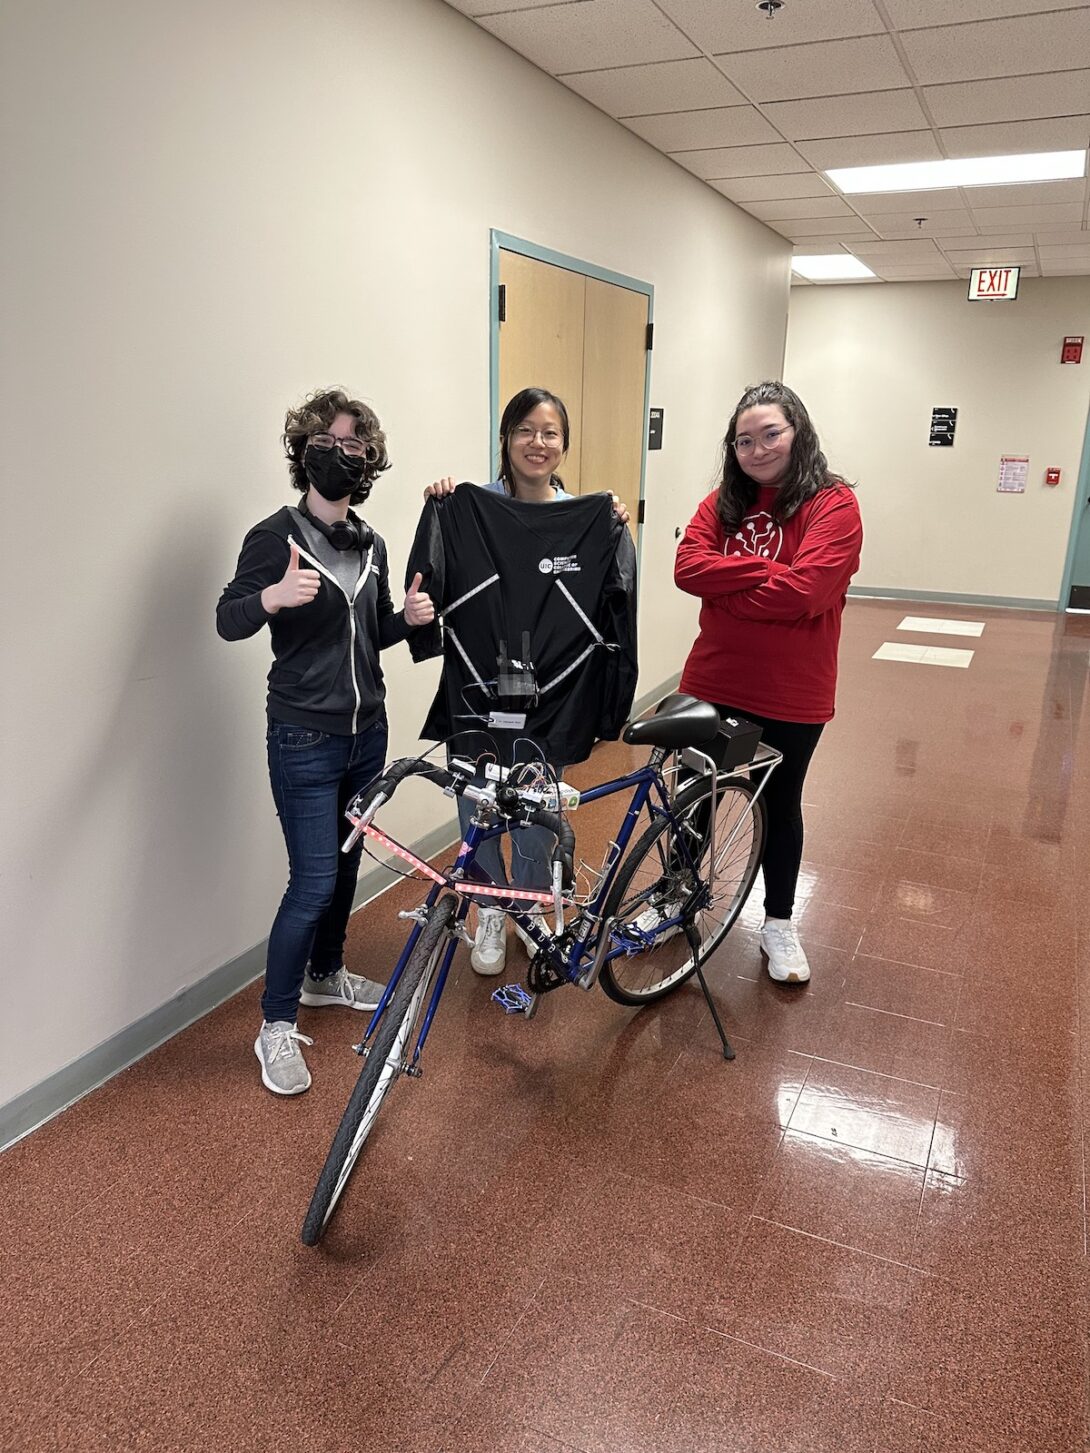 From L: Polly Ruhnke, Annie You, and Emily Mendoza with a bicycle outfitted with the Lite-Bike